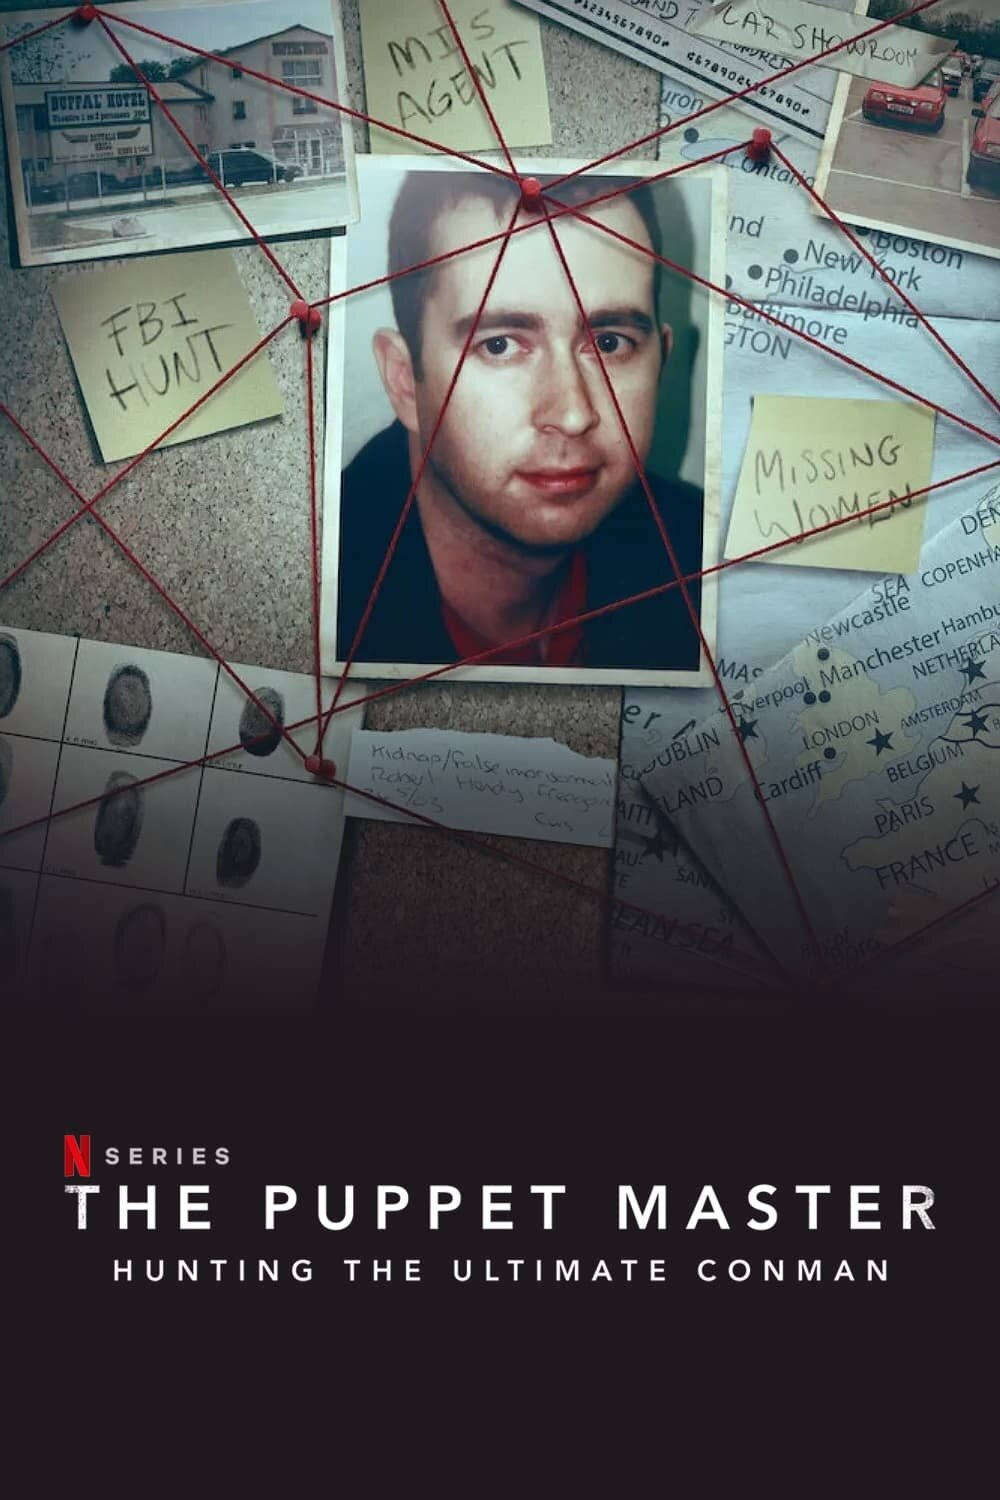 The Puppet Master: Hunting the Ultimate Conman ne zaman